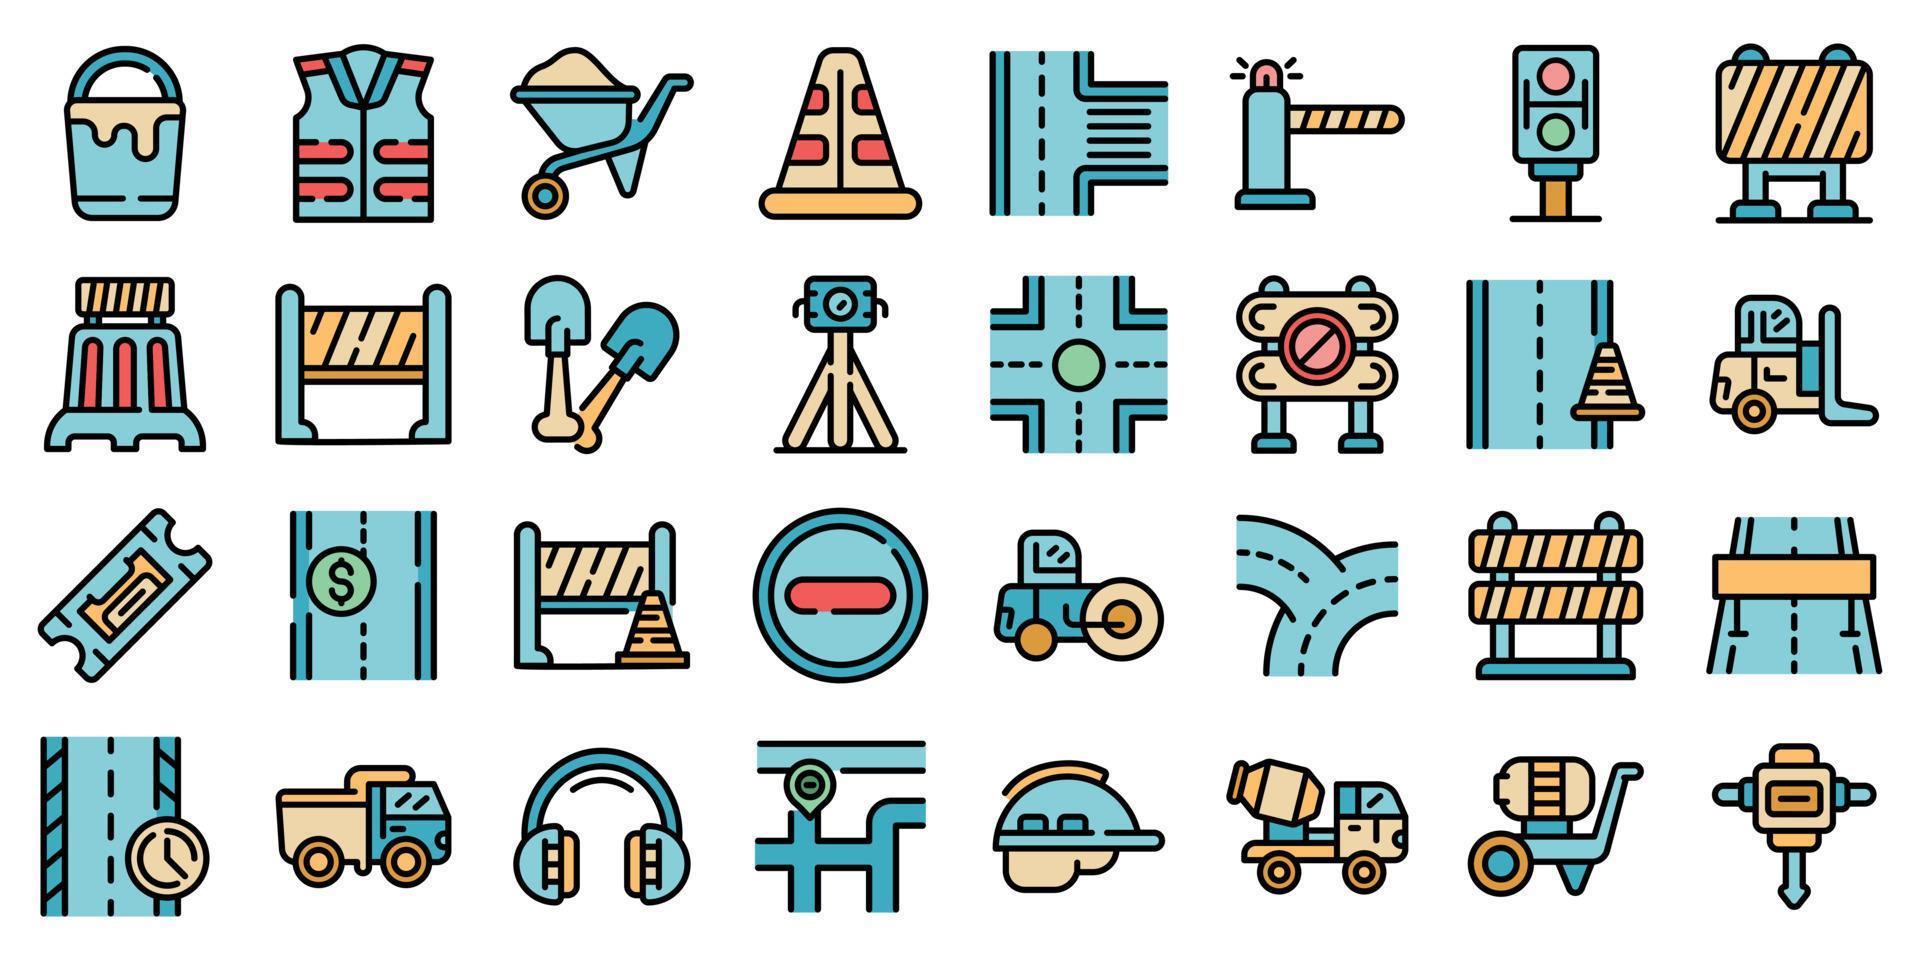 Highway construction icons set vector flat